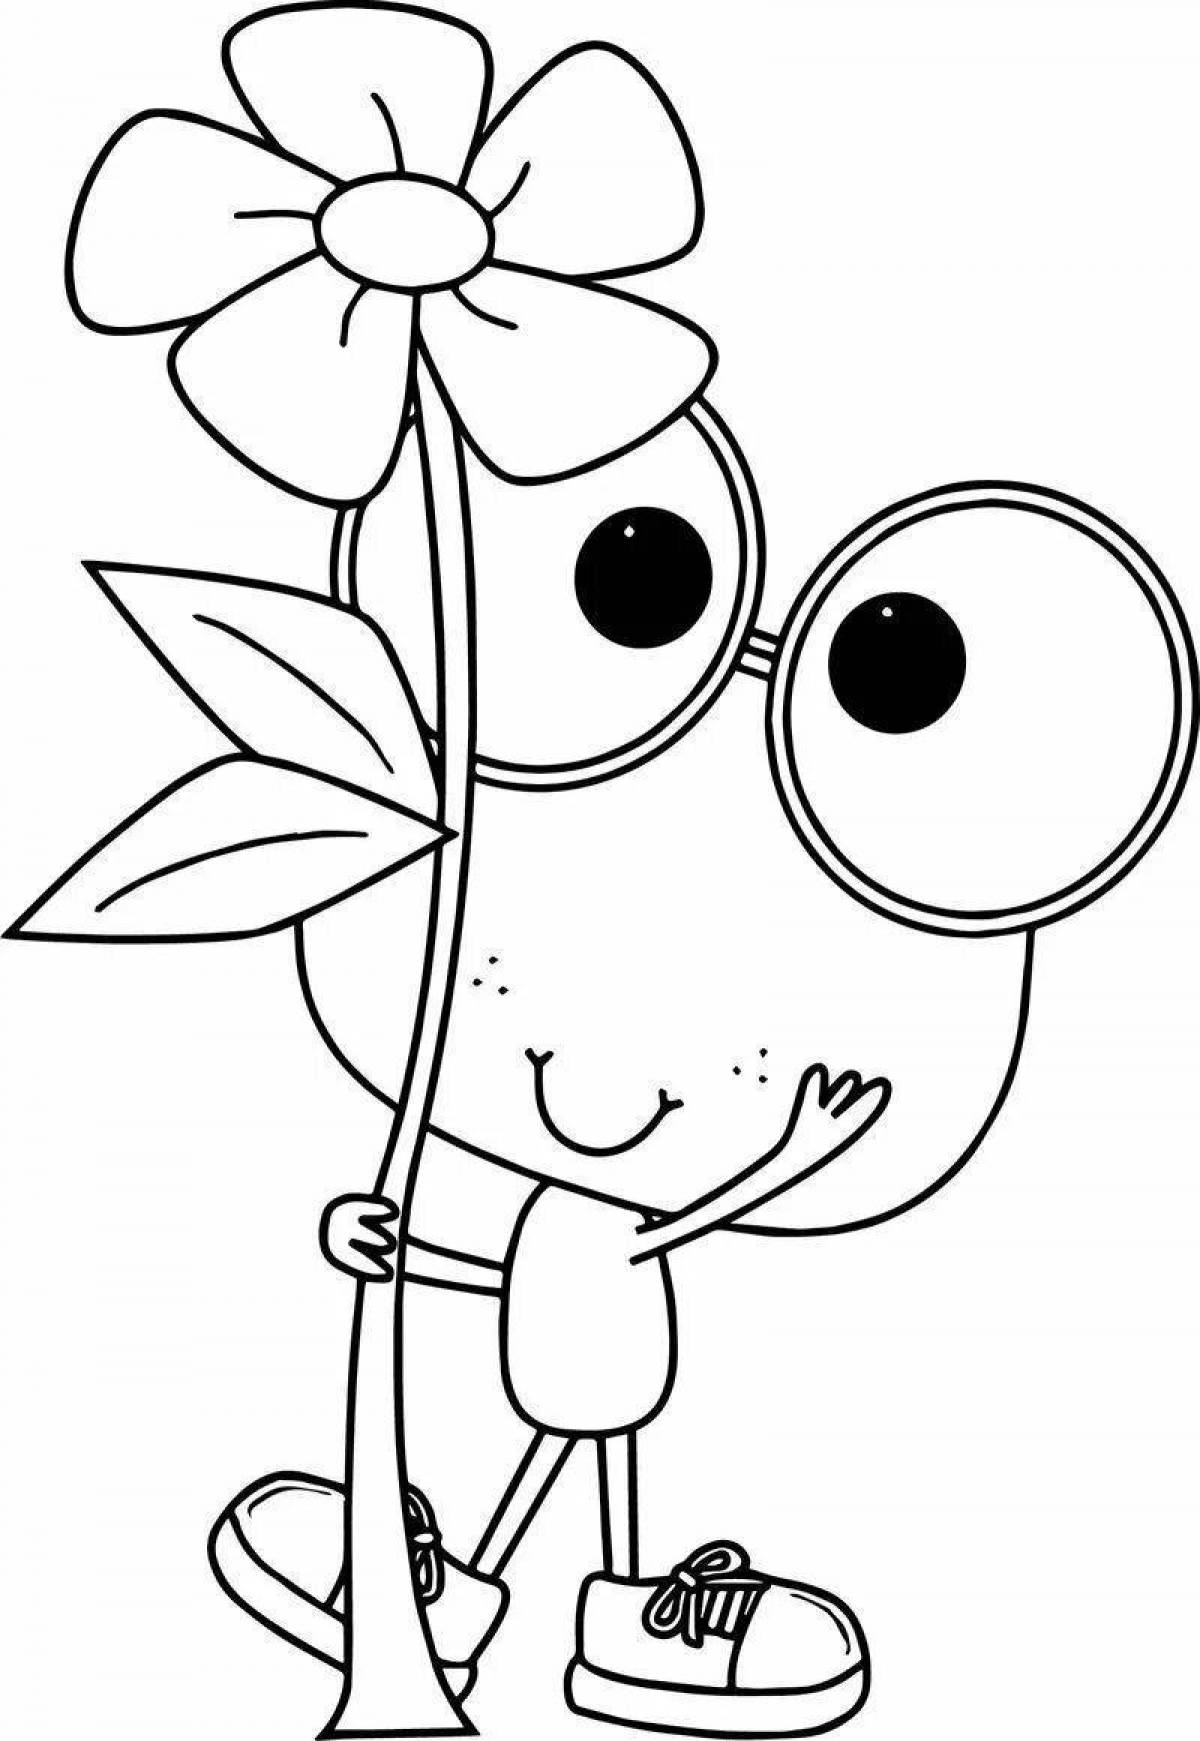 Colorful buba coloring page for kids